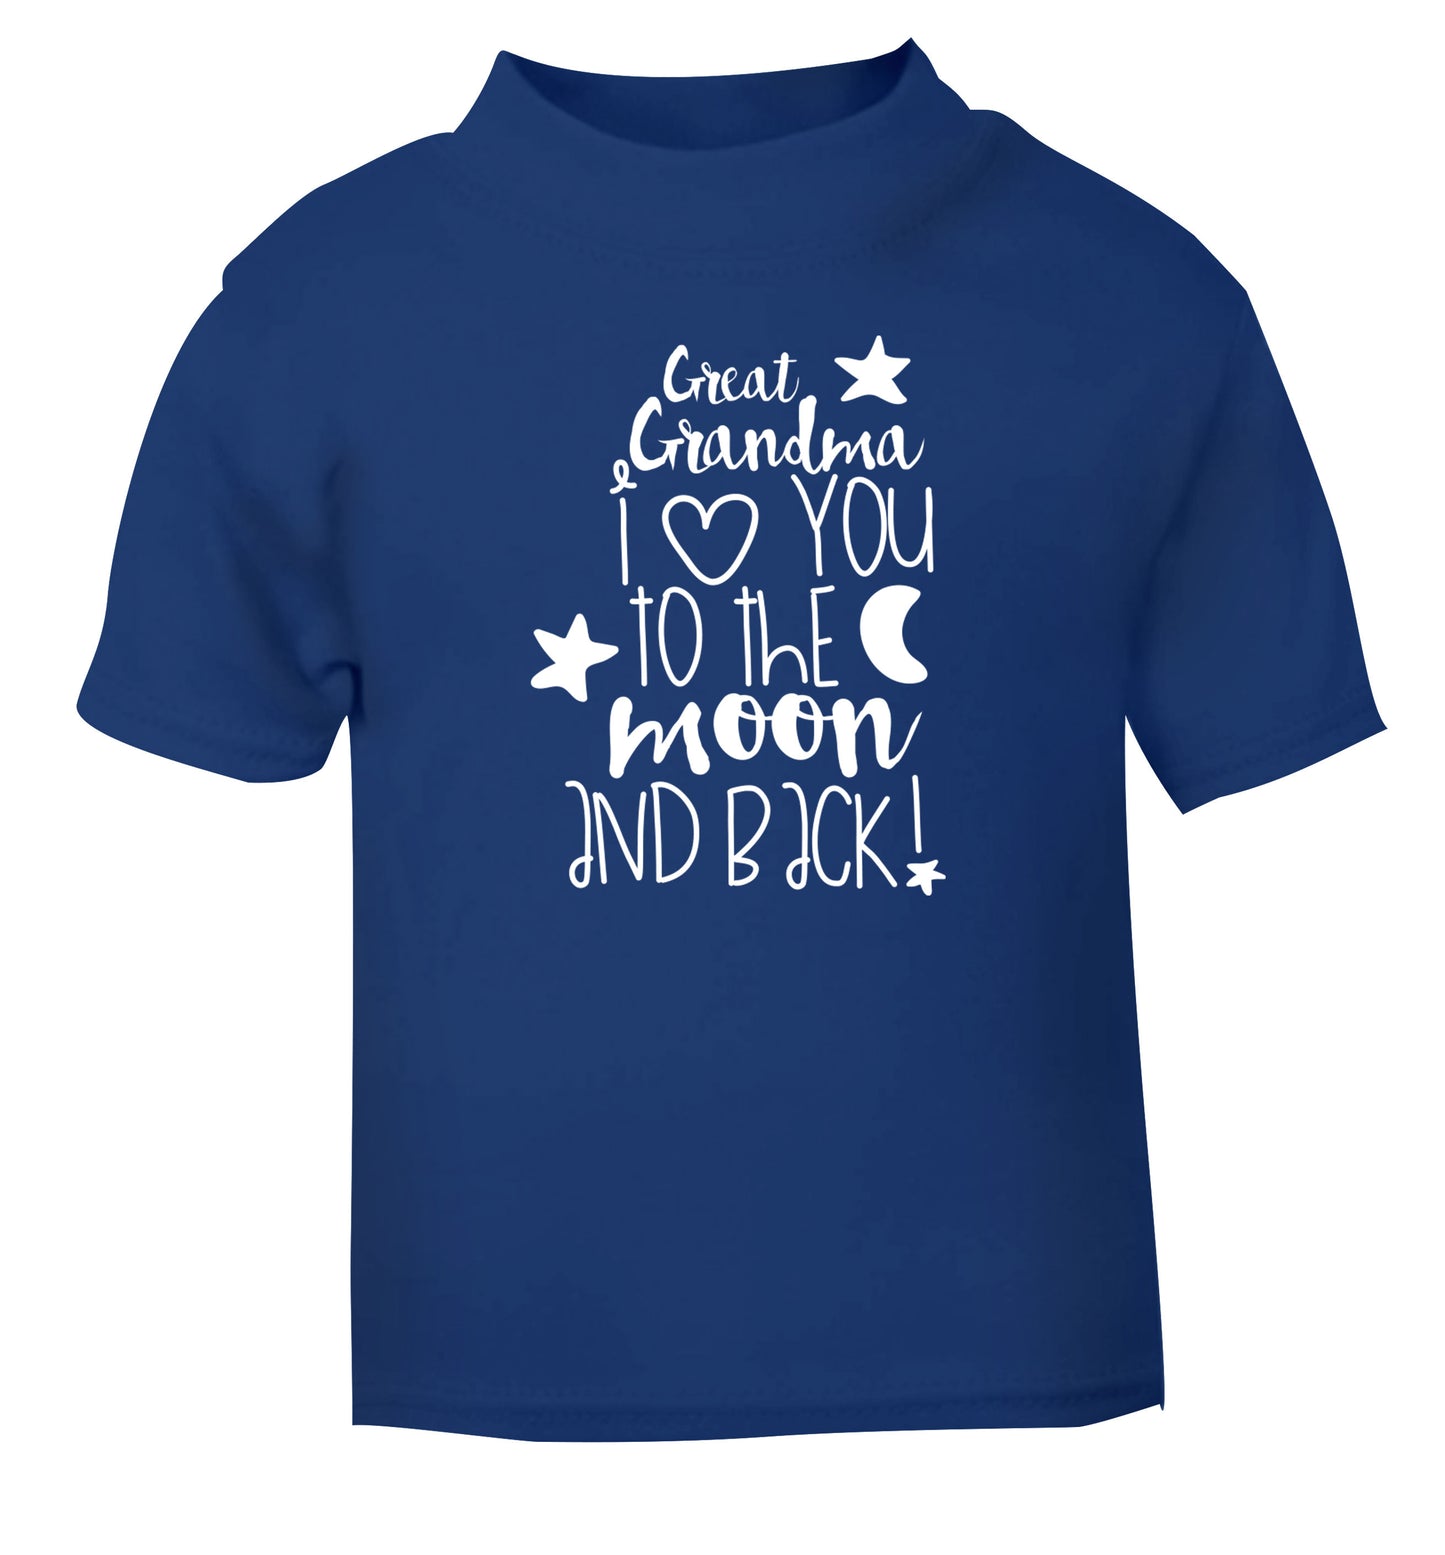 Great Grandma I love you to the moon and back blue Baby Toddler Tshirt 2 Years